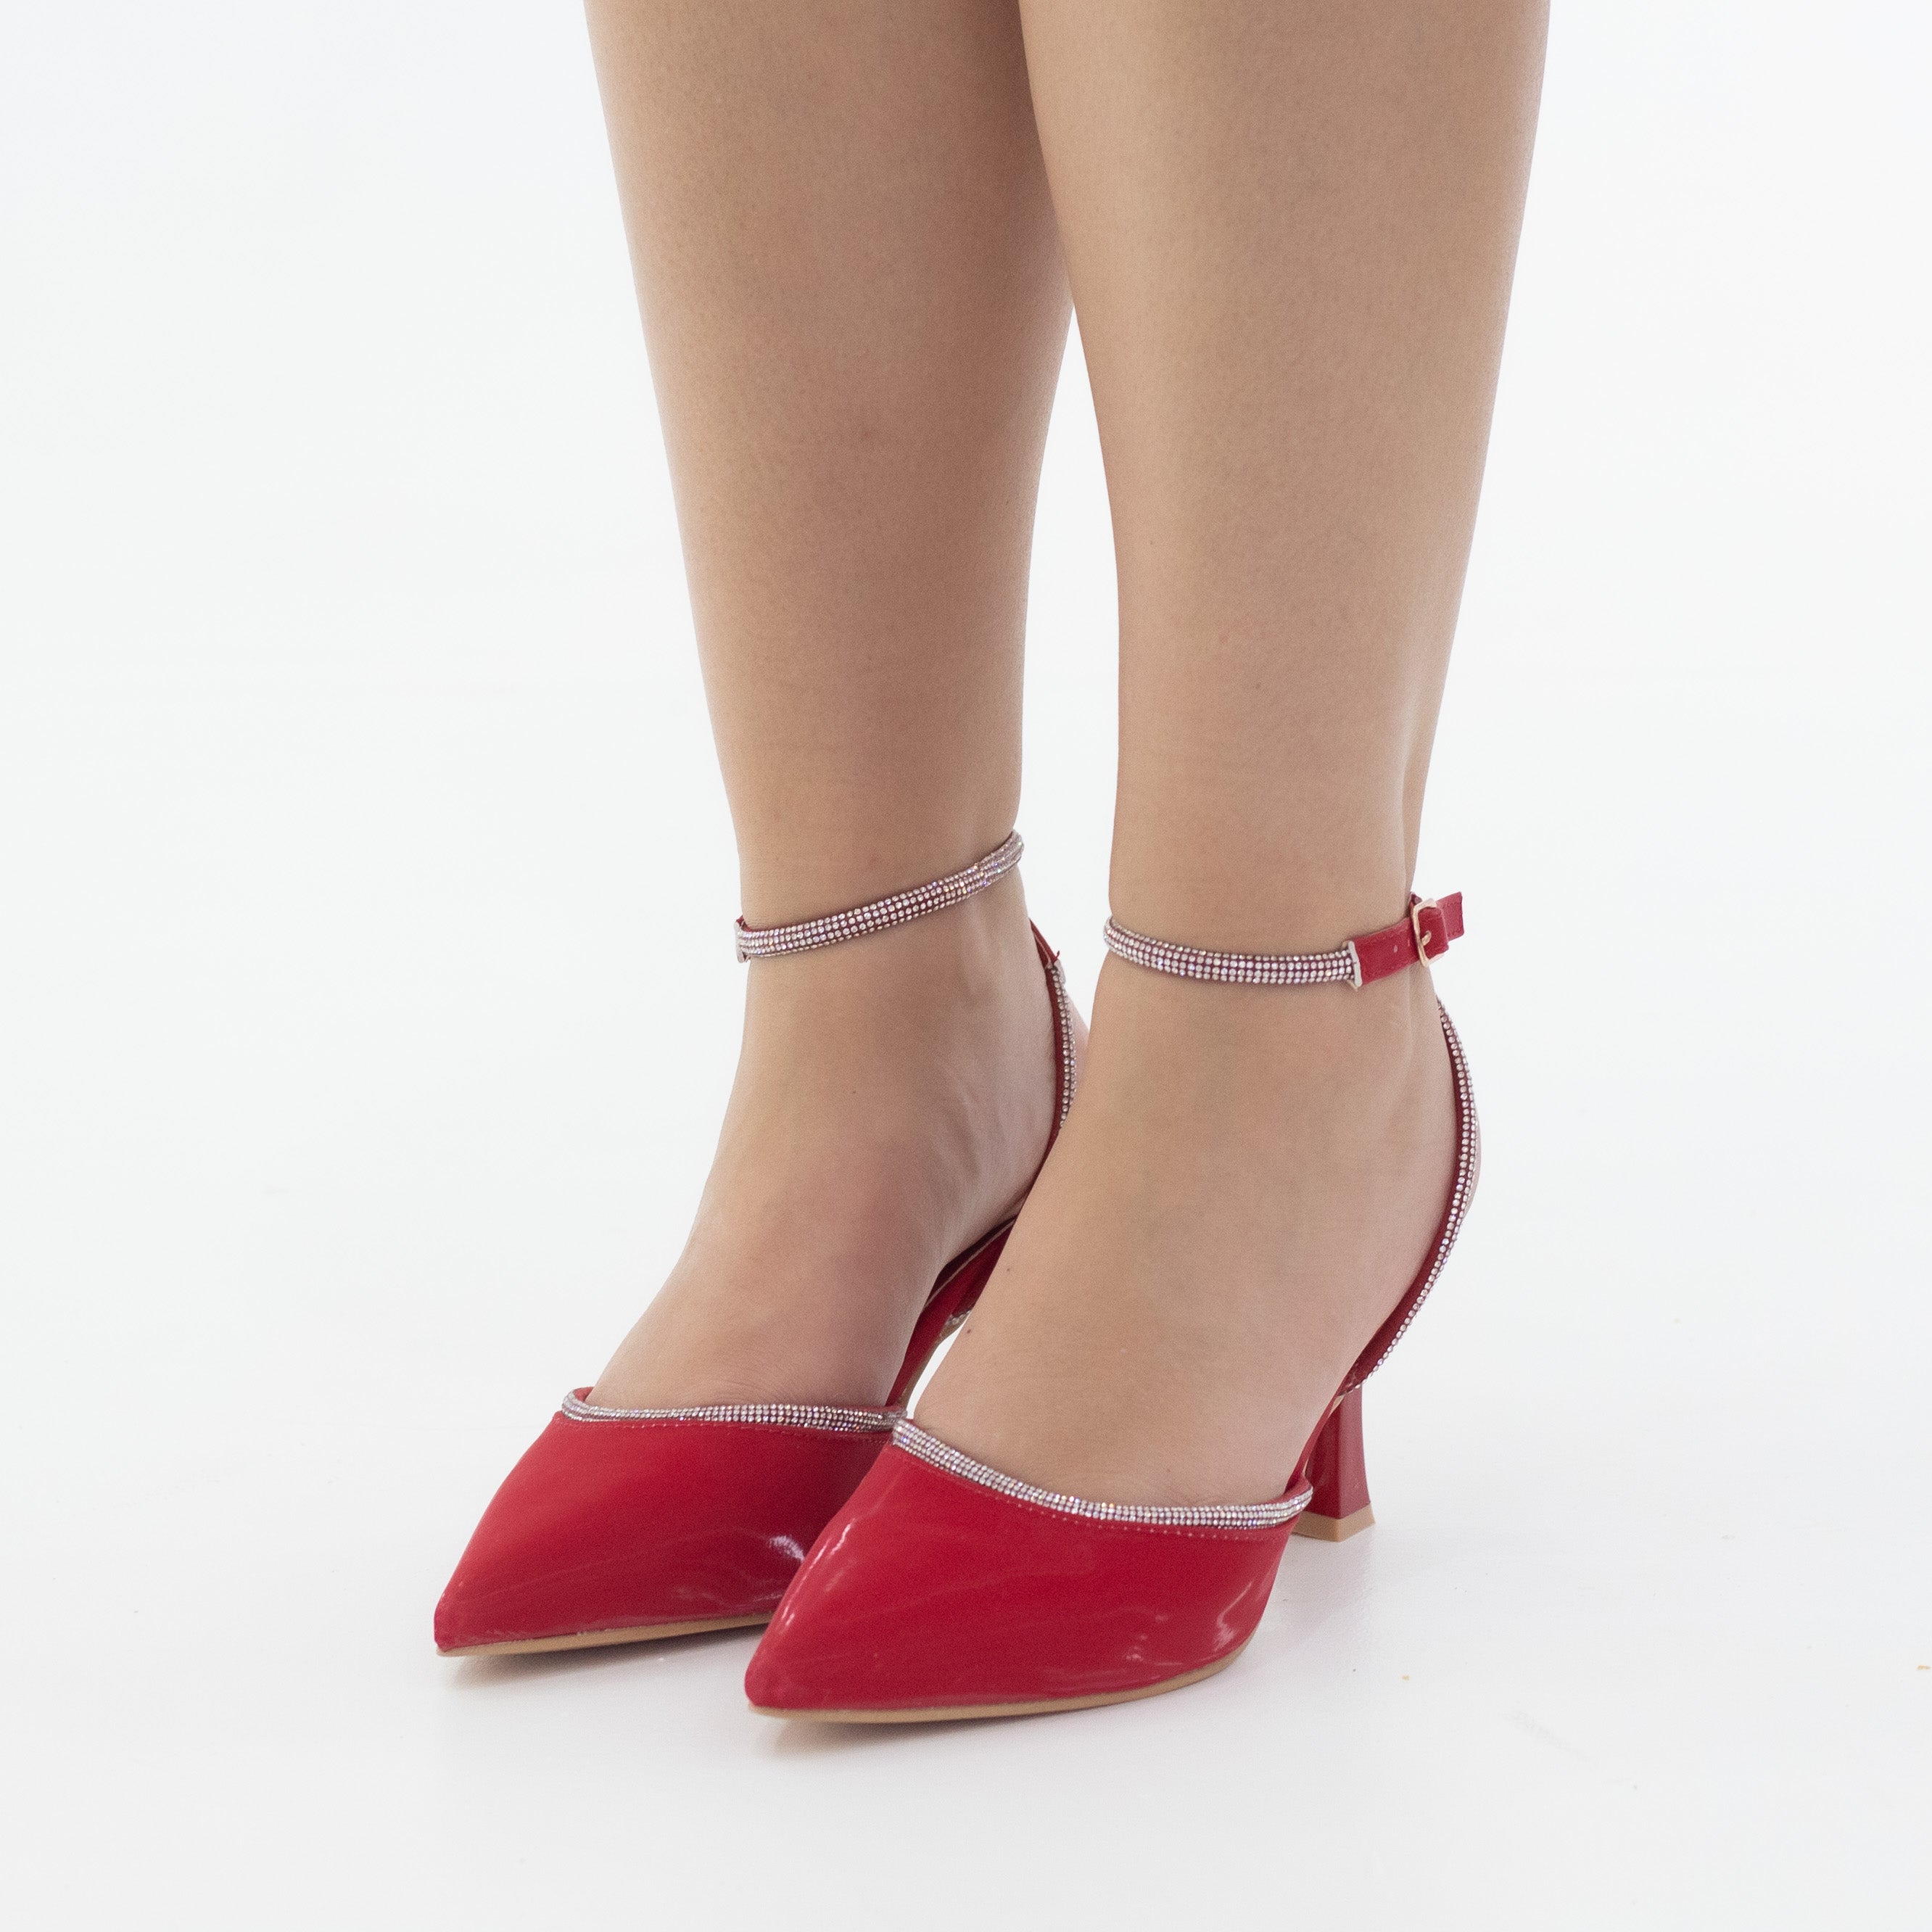 Hamisha embellished with diamante detailed on spool heel red